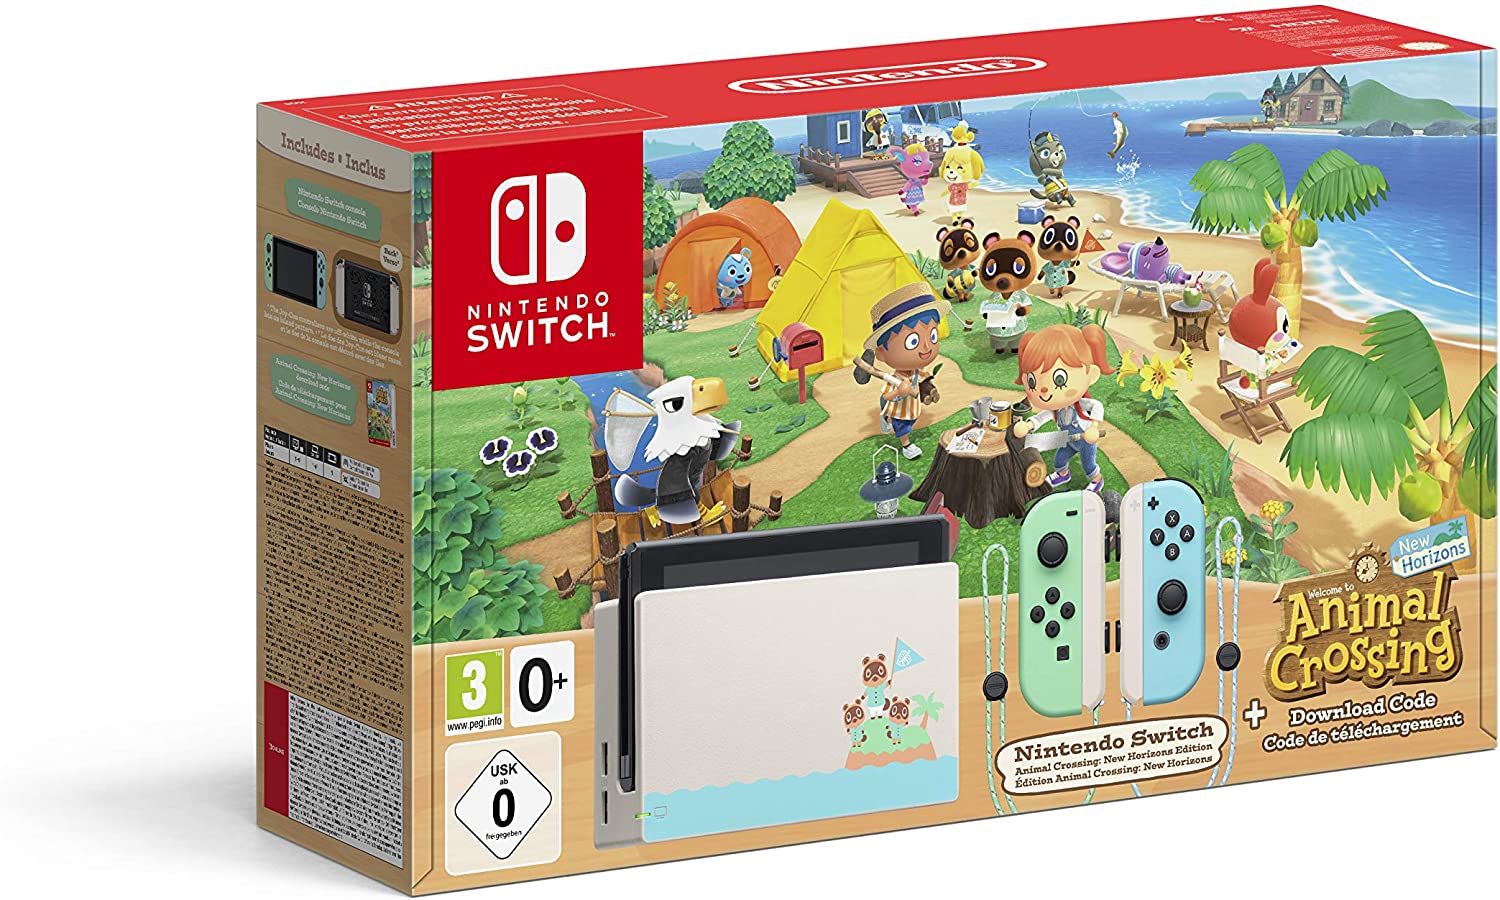 console Nintendo Switch édition limitée Animal Crossing